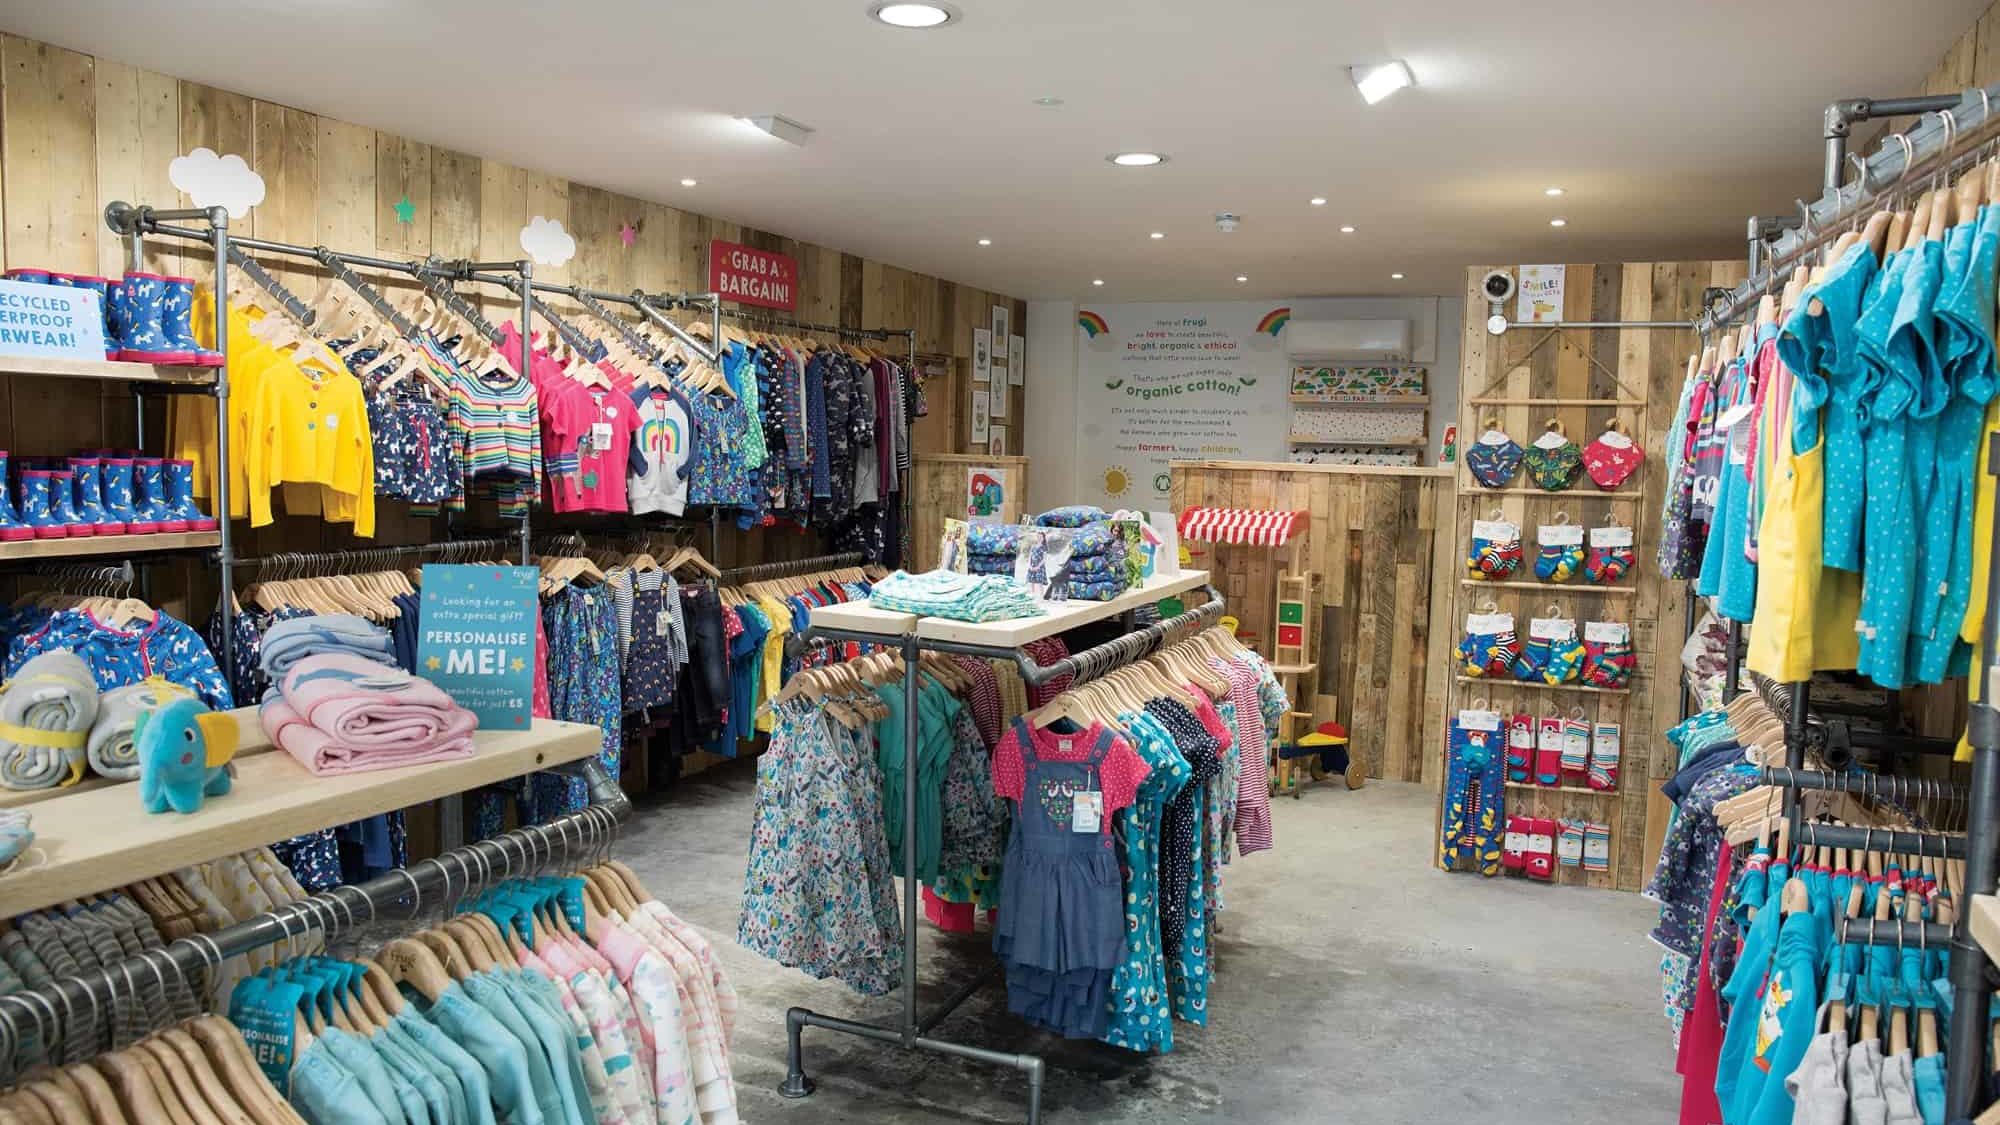 Frugi expands with warehouse in Netherlands